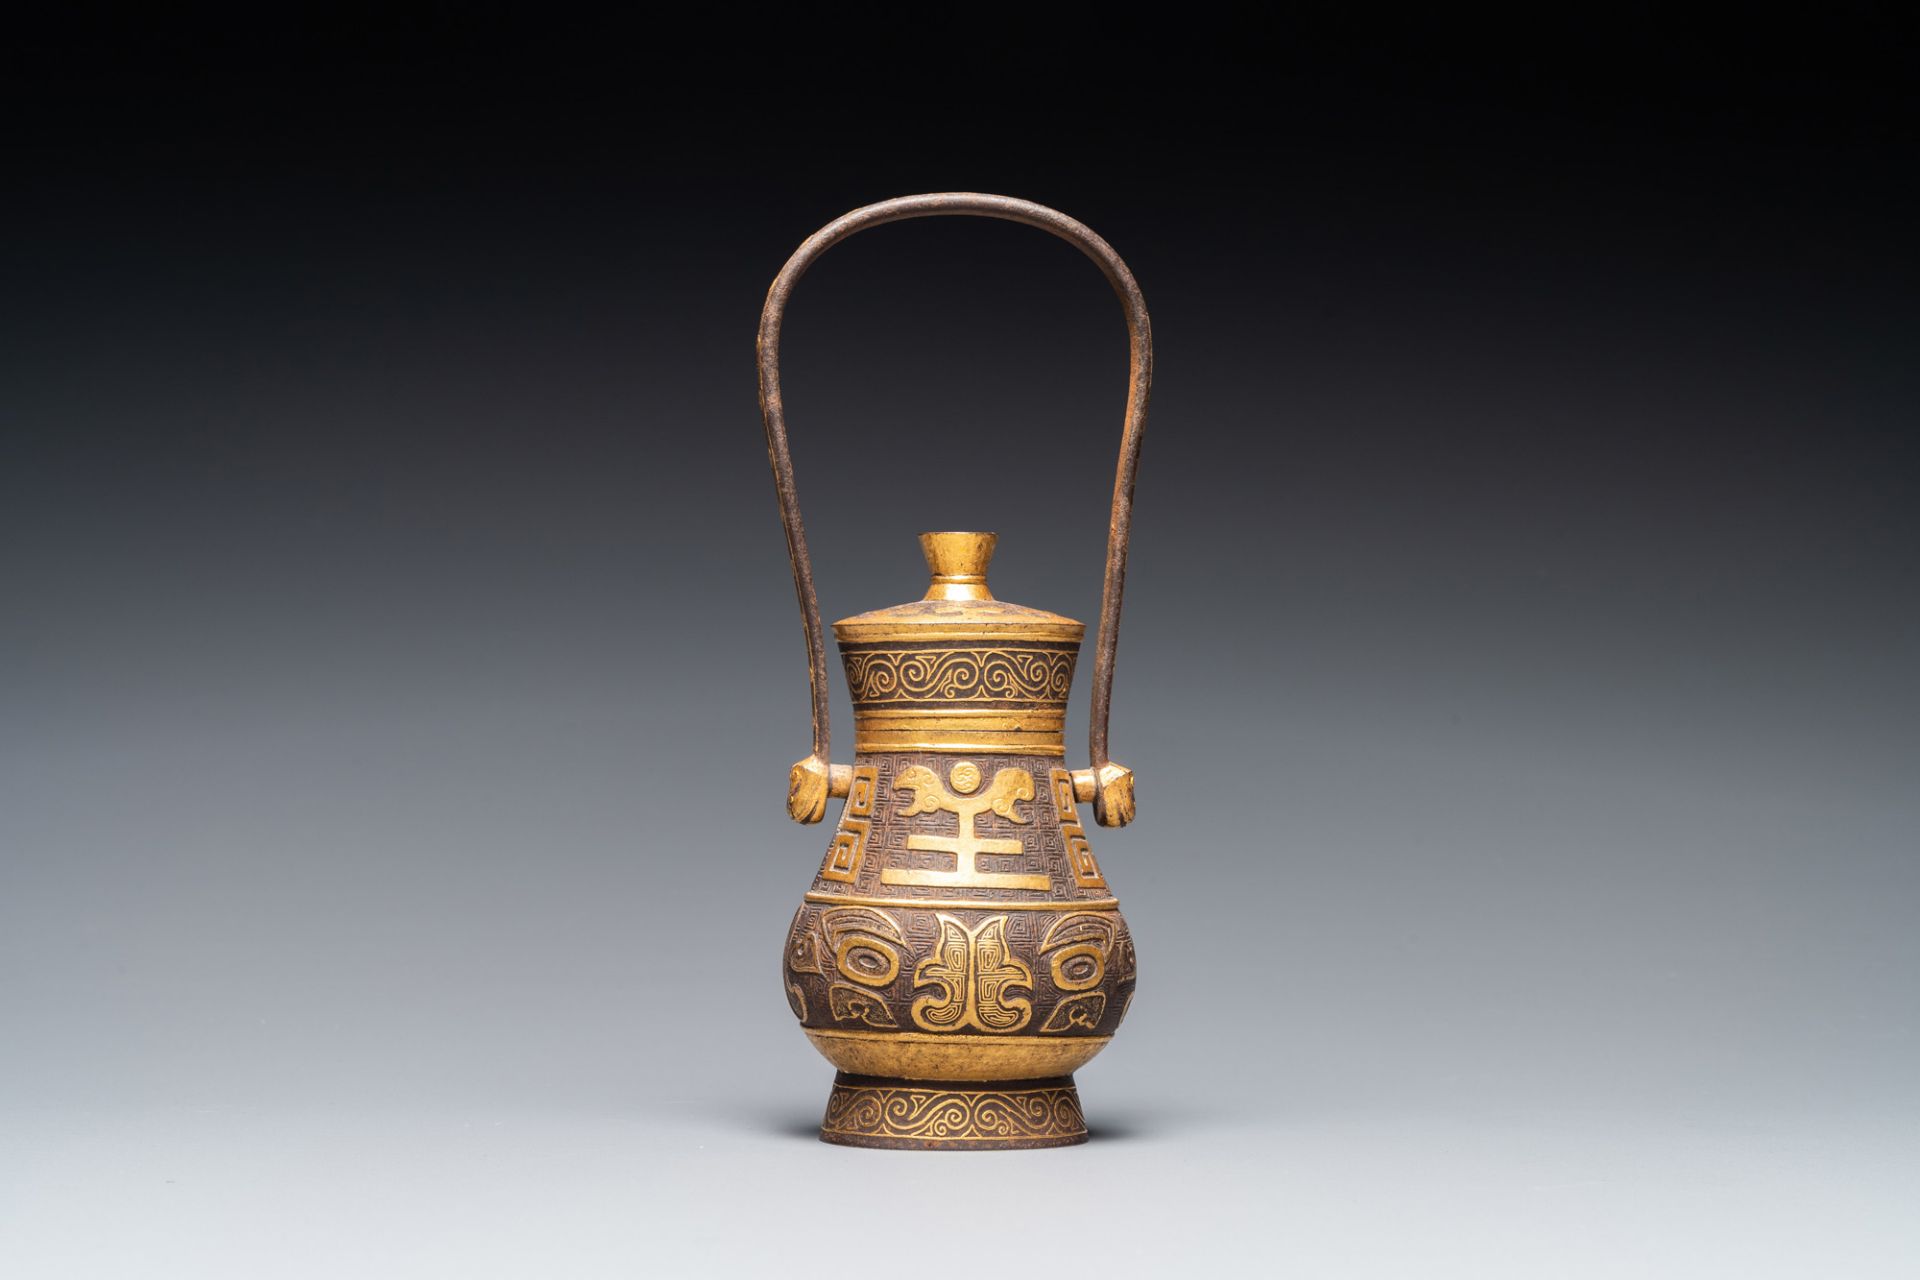 A Chinese gold-leaf-decorated cast iron vase and cover, probably 19th C. - Image 4 of 7